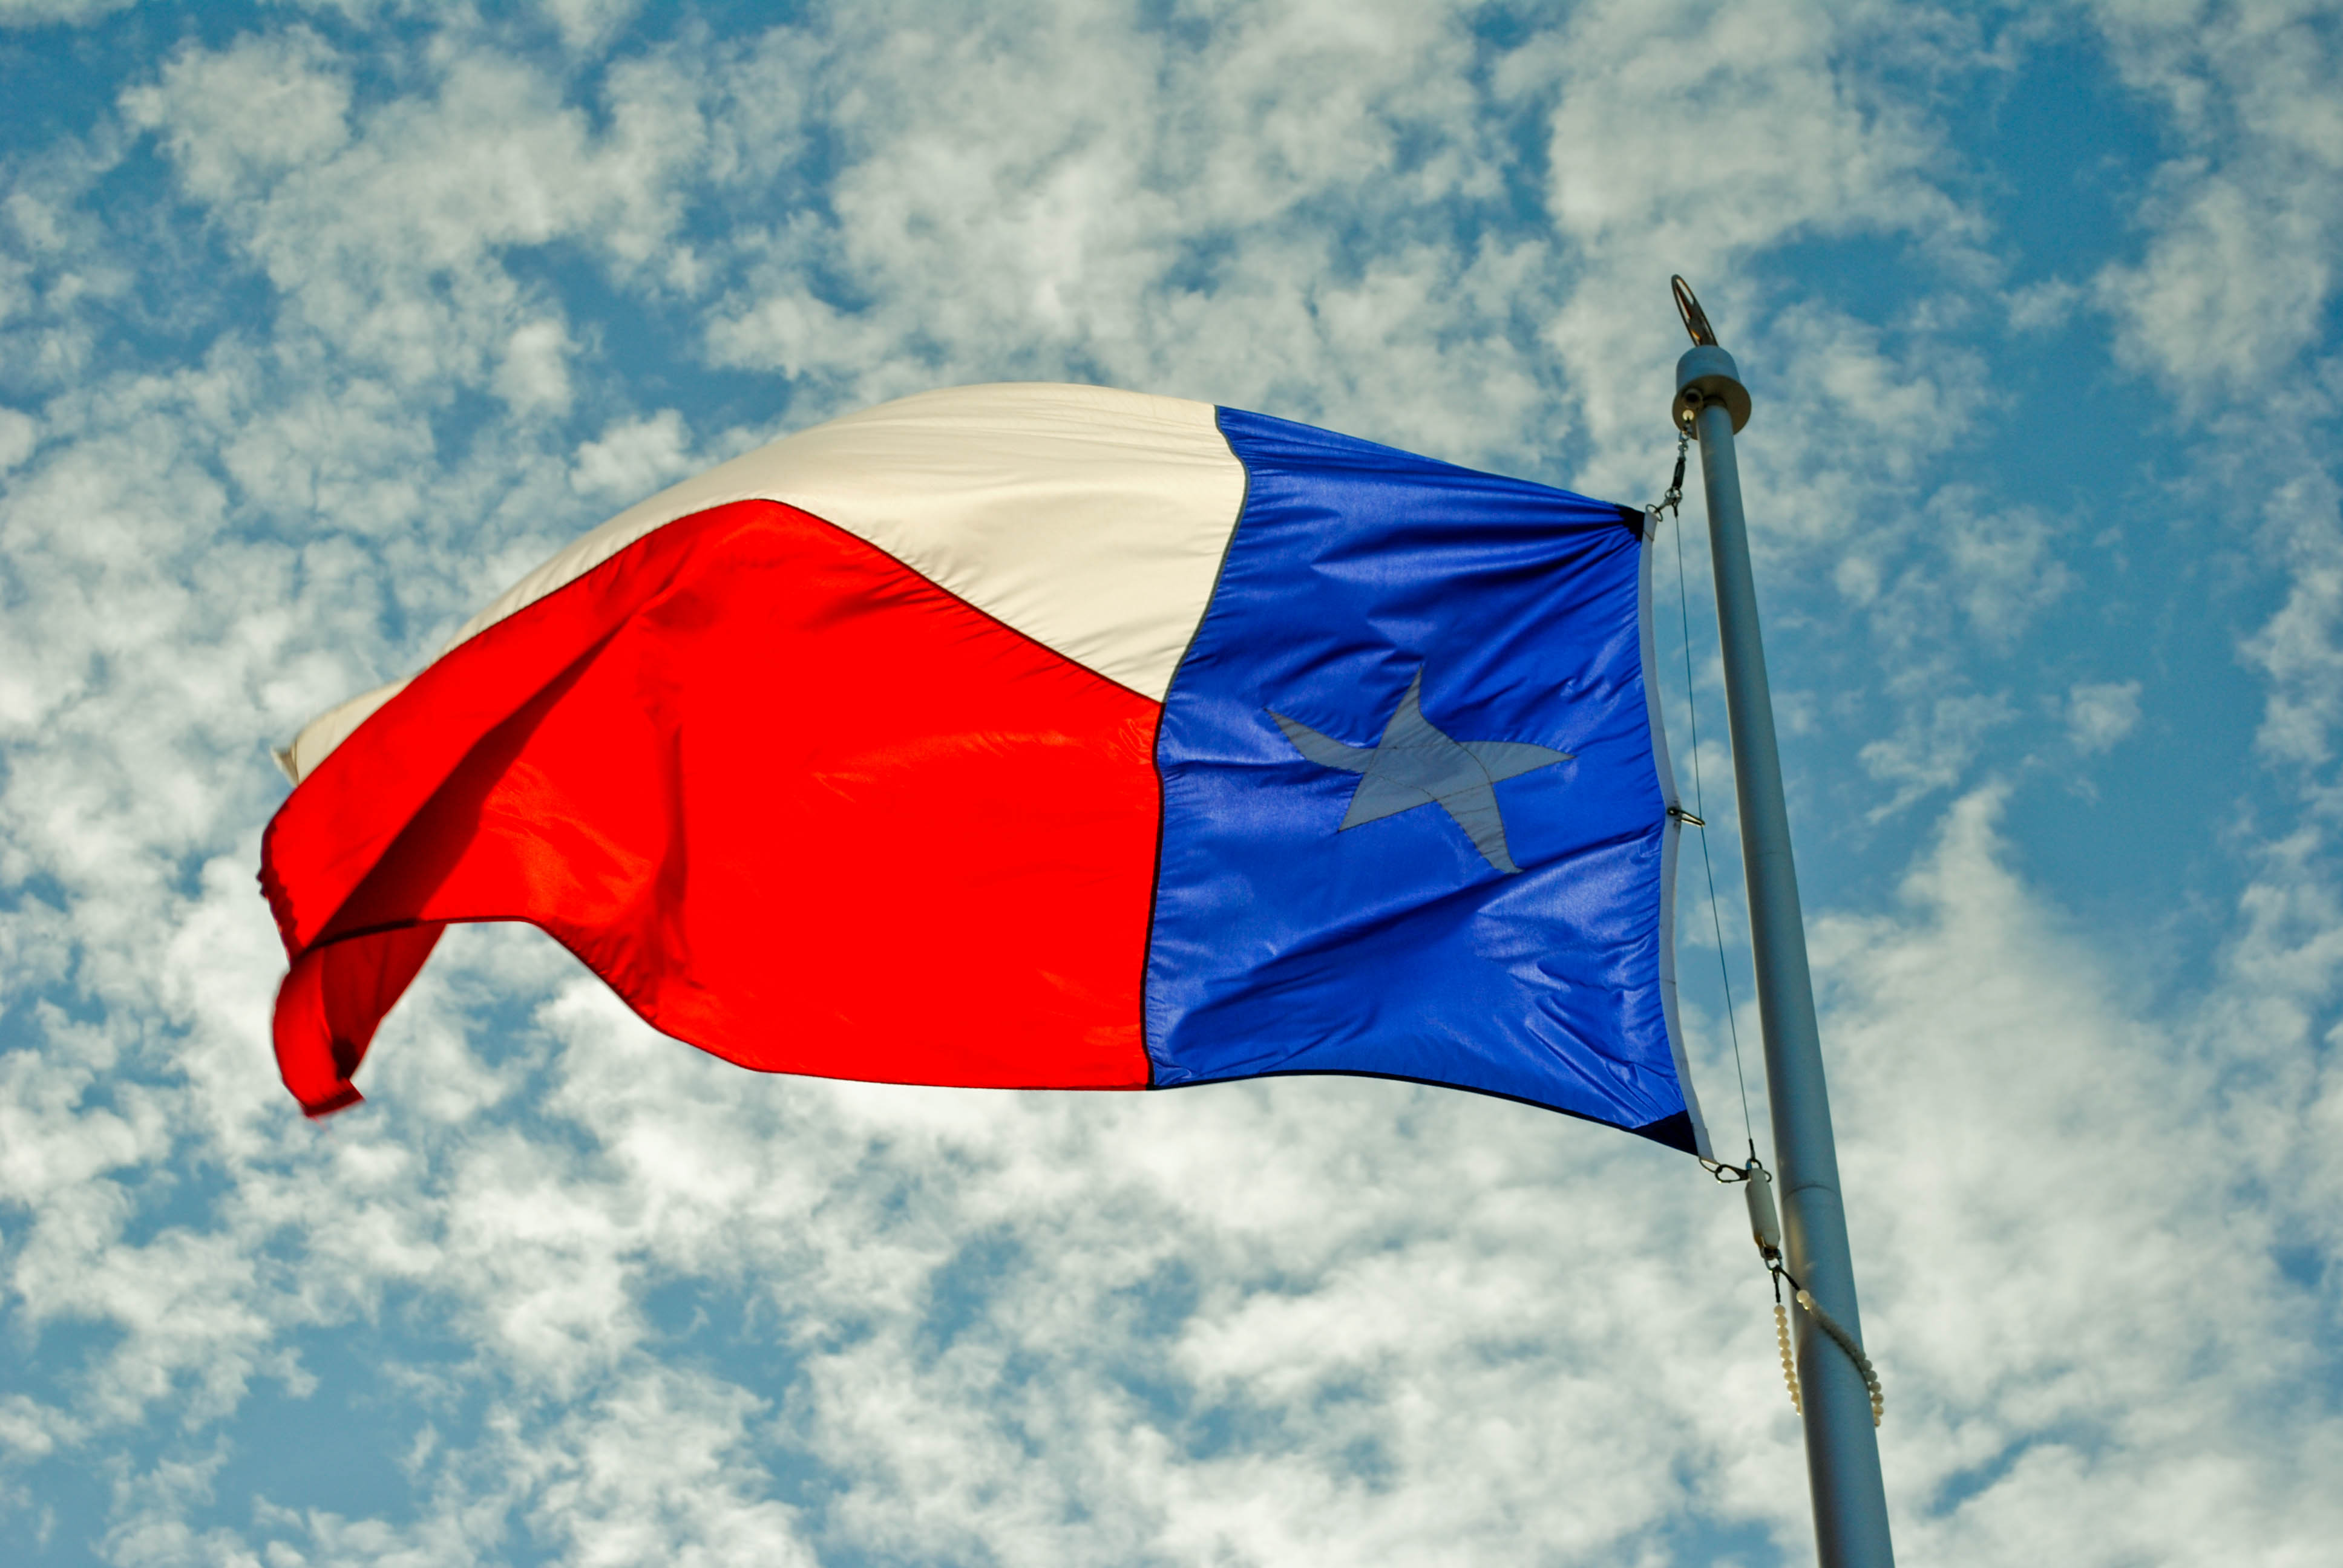 Texas Flag Iphone Wallpapers